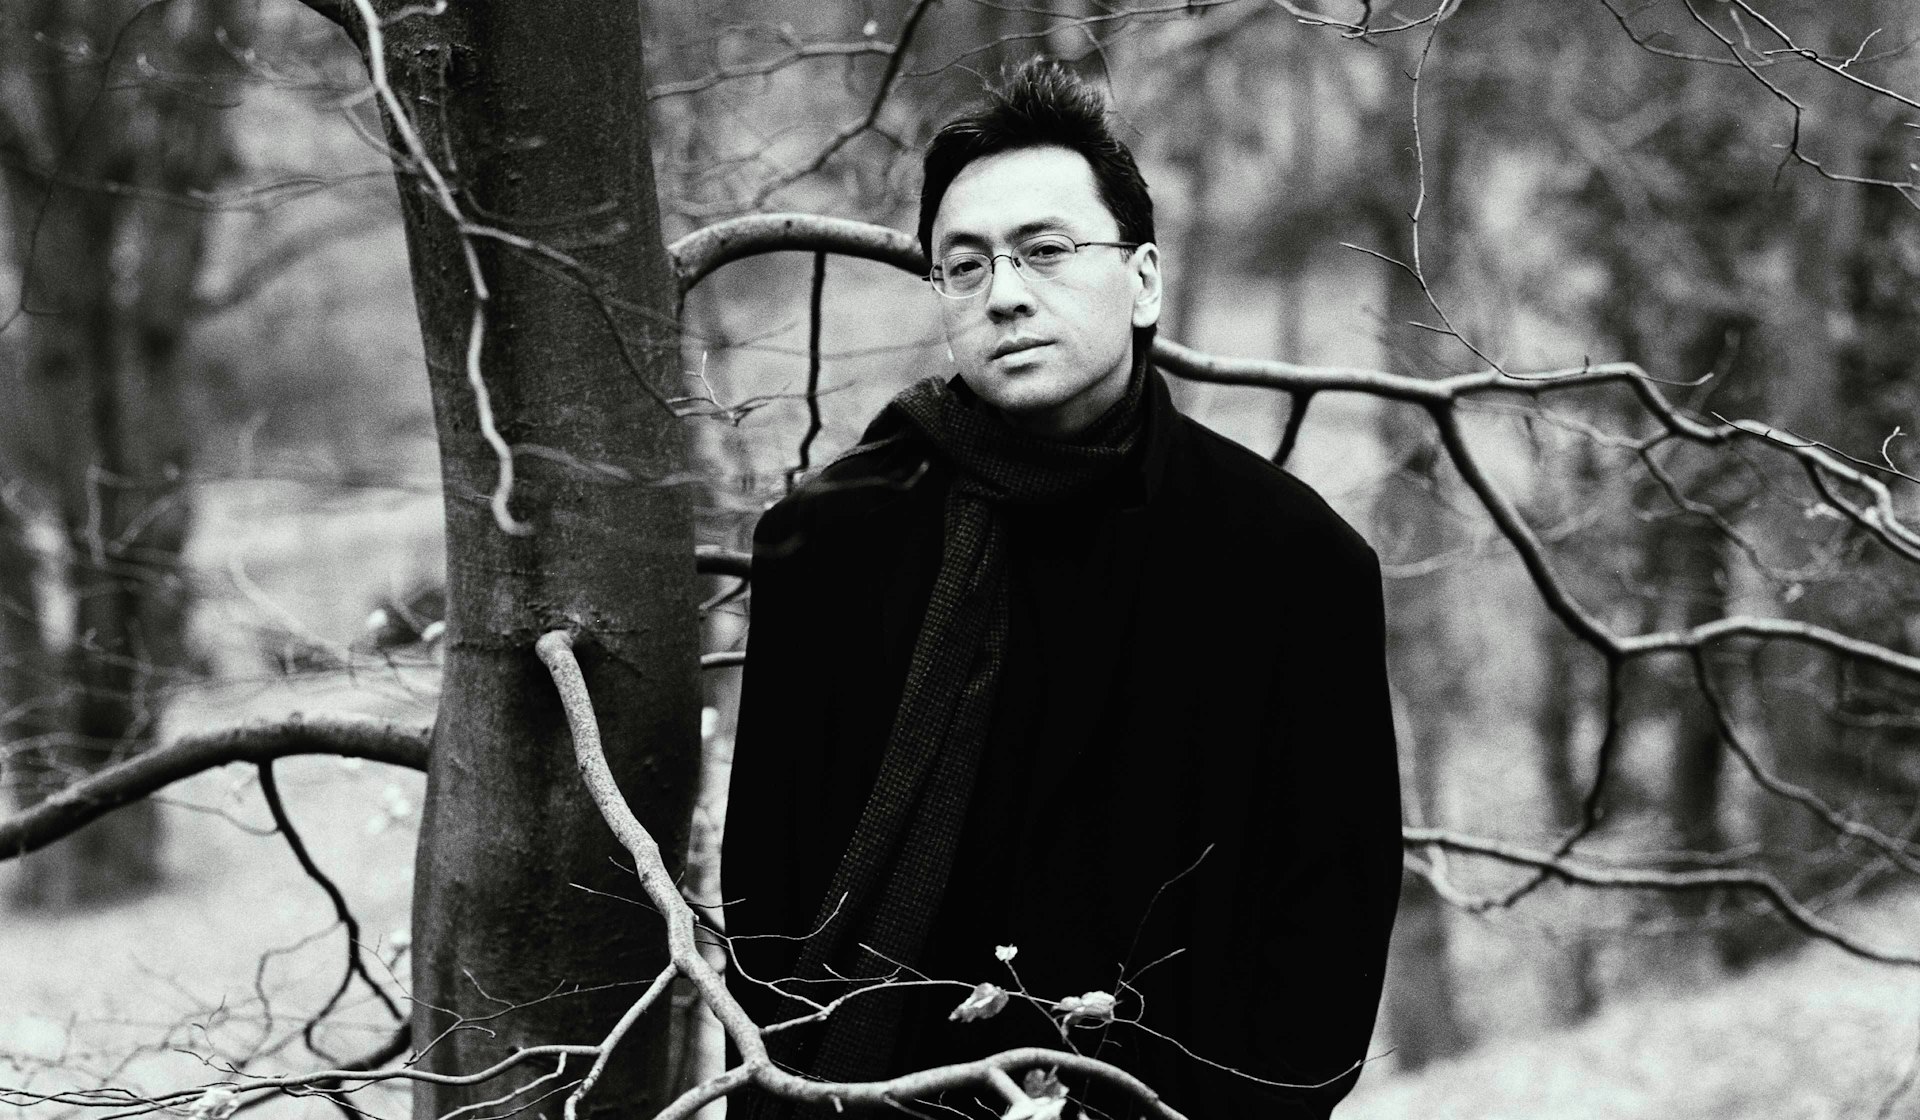 How working with homeless people gave Kazuo Ishiguro an education in human nature